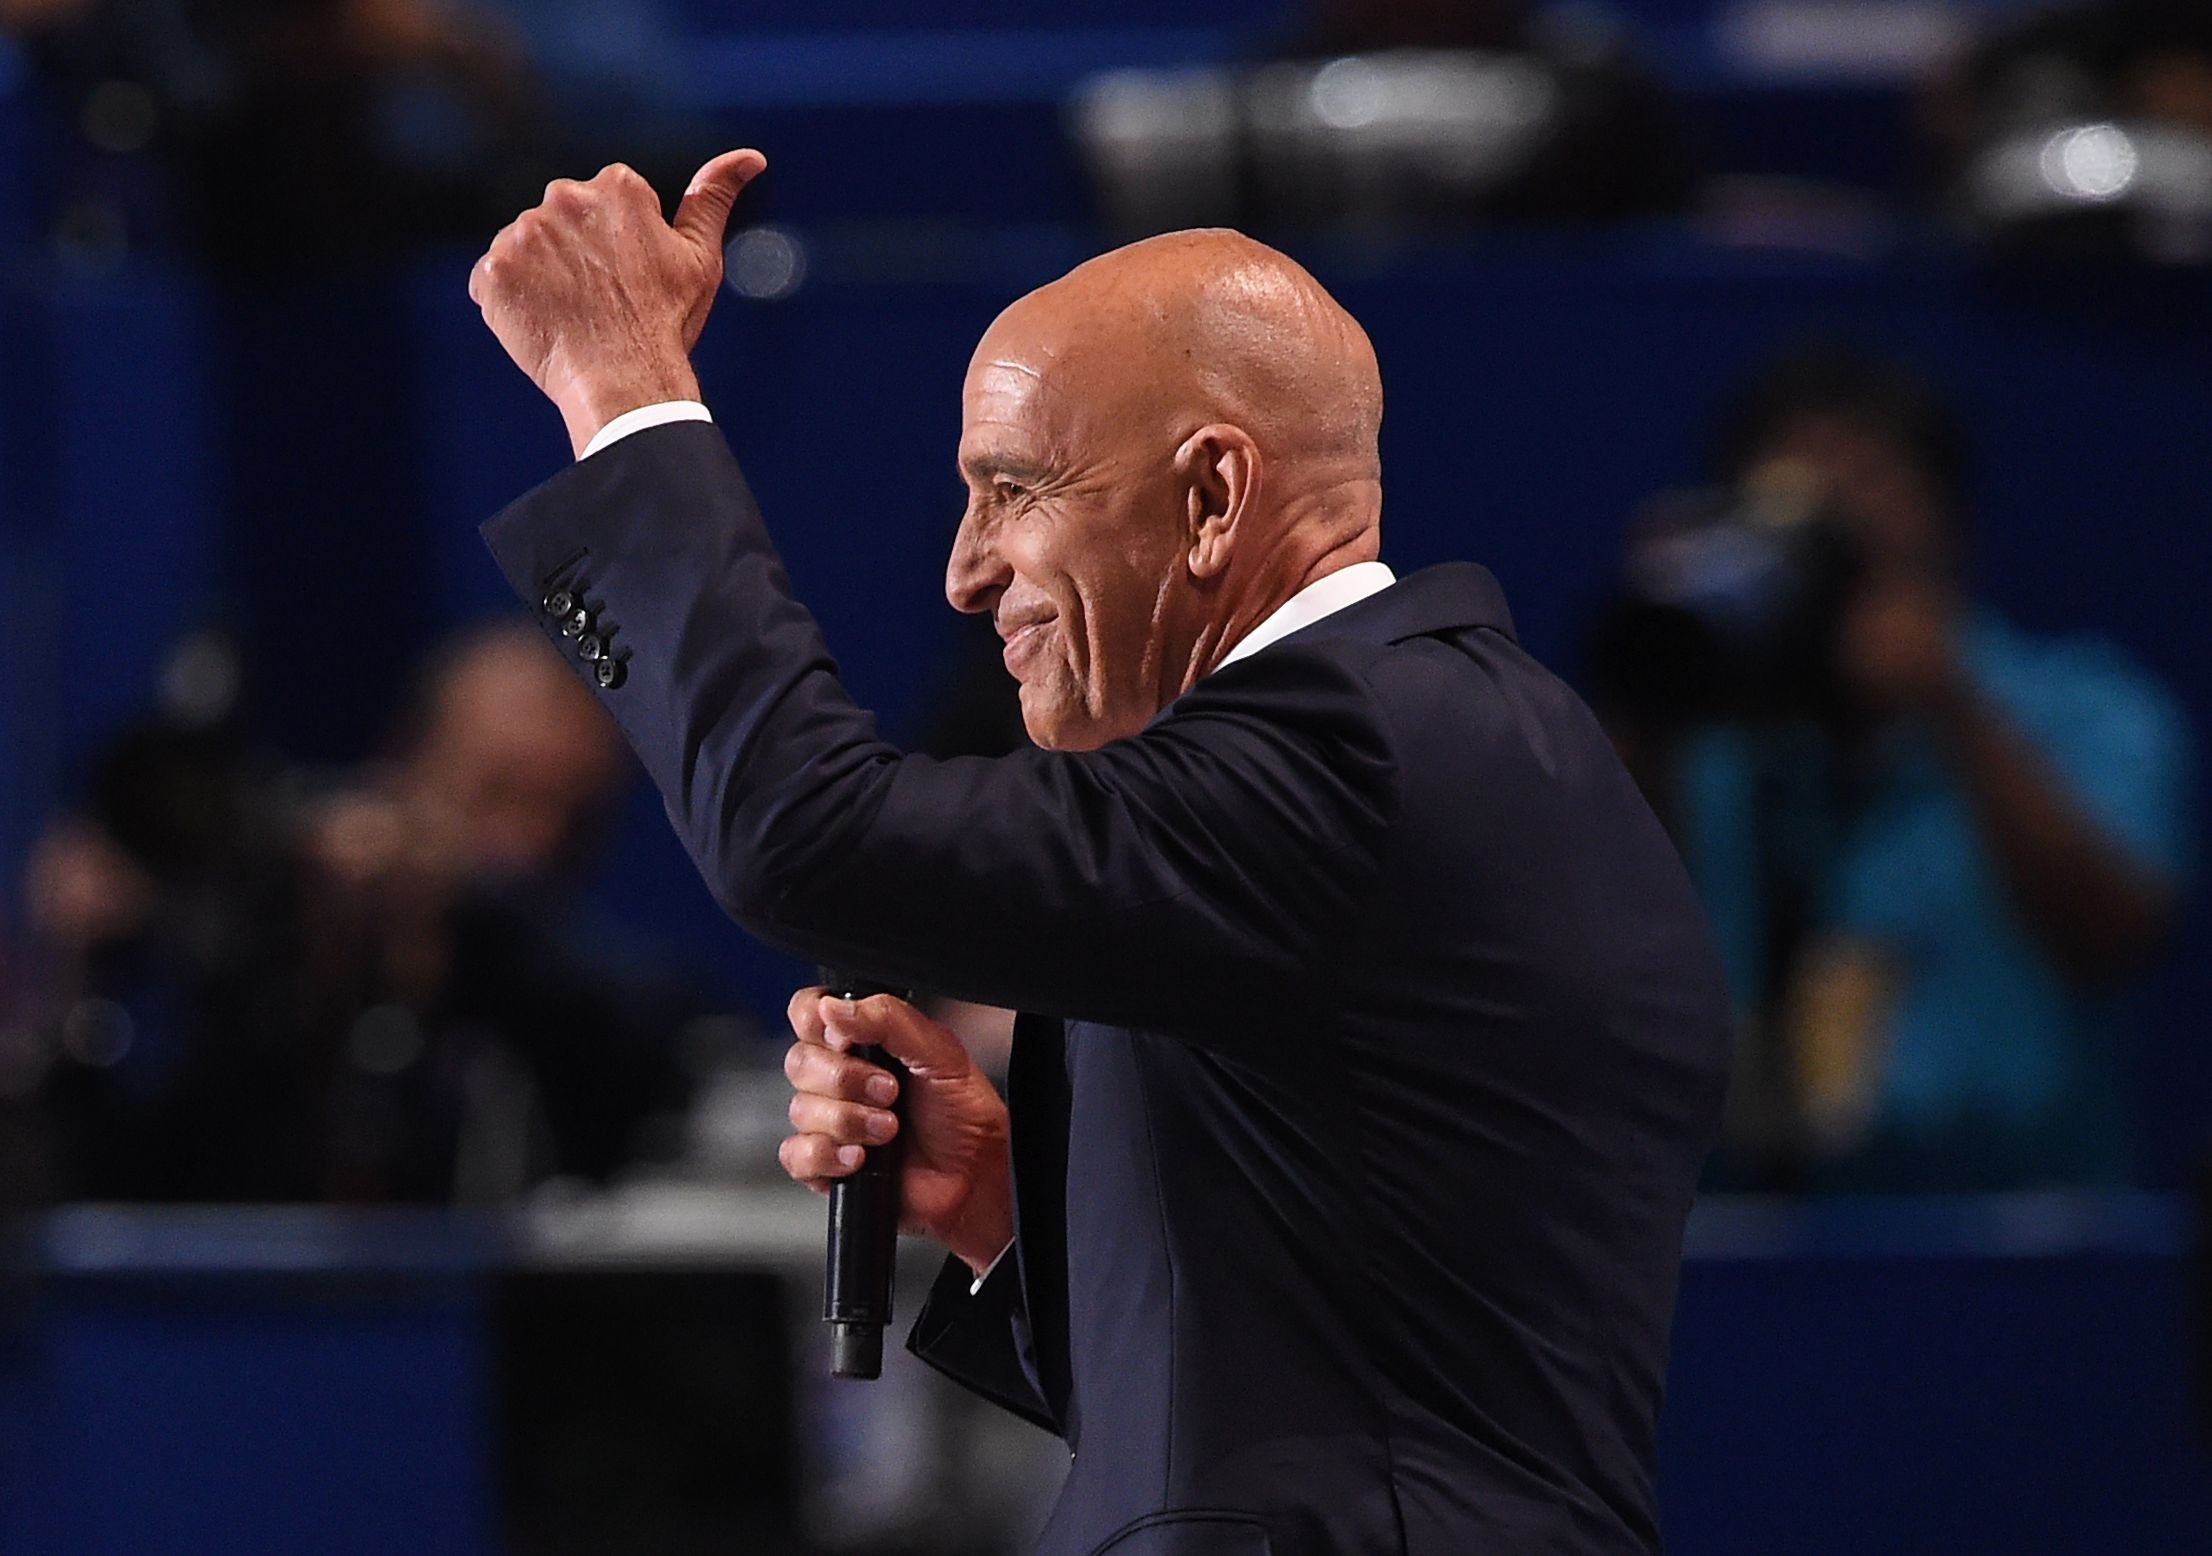 Tom Barrack, CEO of Colony Capital, addresses the final night of the Republican National Convention at Quicken Loans Arena in Cleveland on July 21, 2016. ((Robyn Beck—AFP/Getty Images))